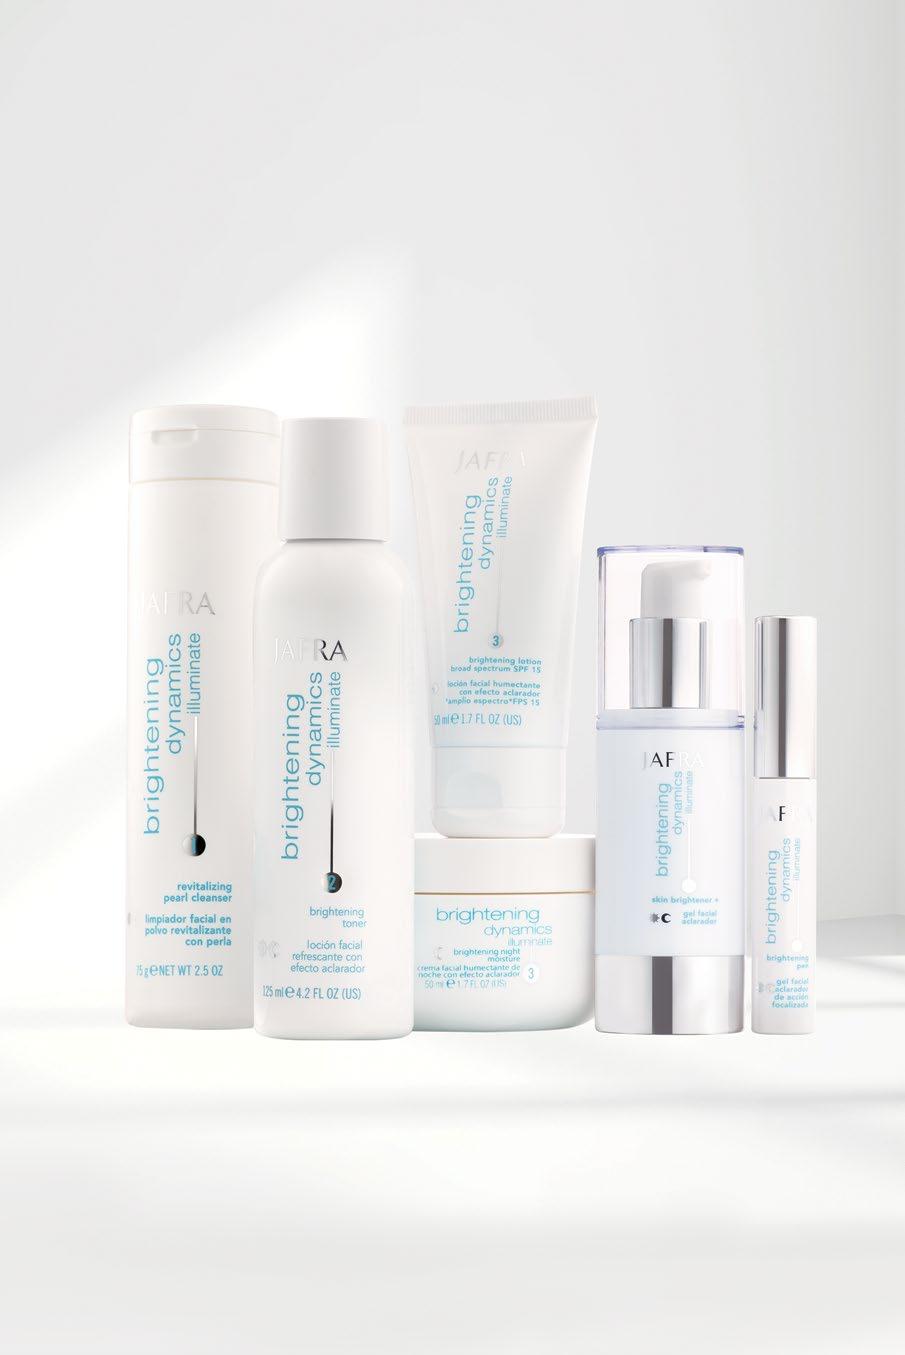 MINIMAL SIGNS OF AGING Come to LIGHT Botanical formulas help reveal your most luminous